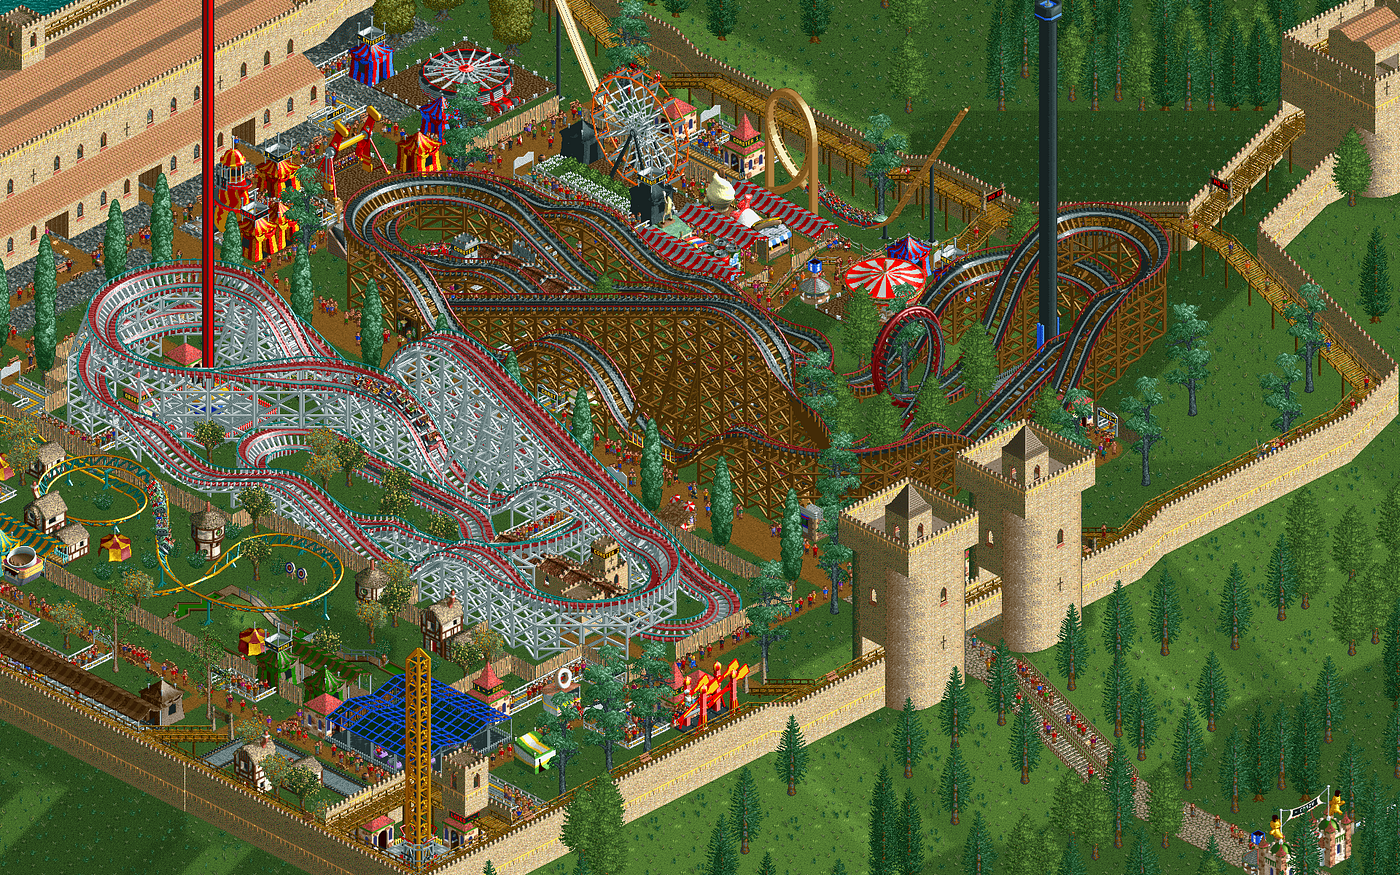 A big interview with Chris Sawyer, the creator of RollerCoaster Tycoon